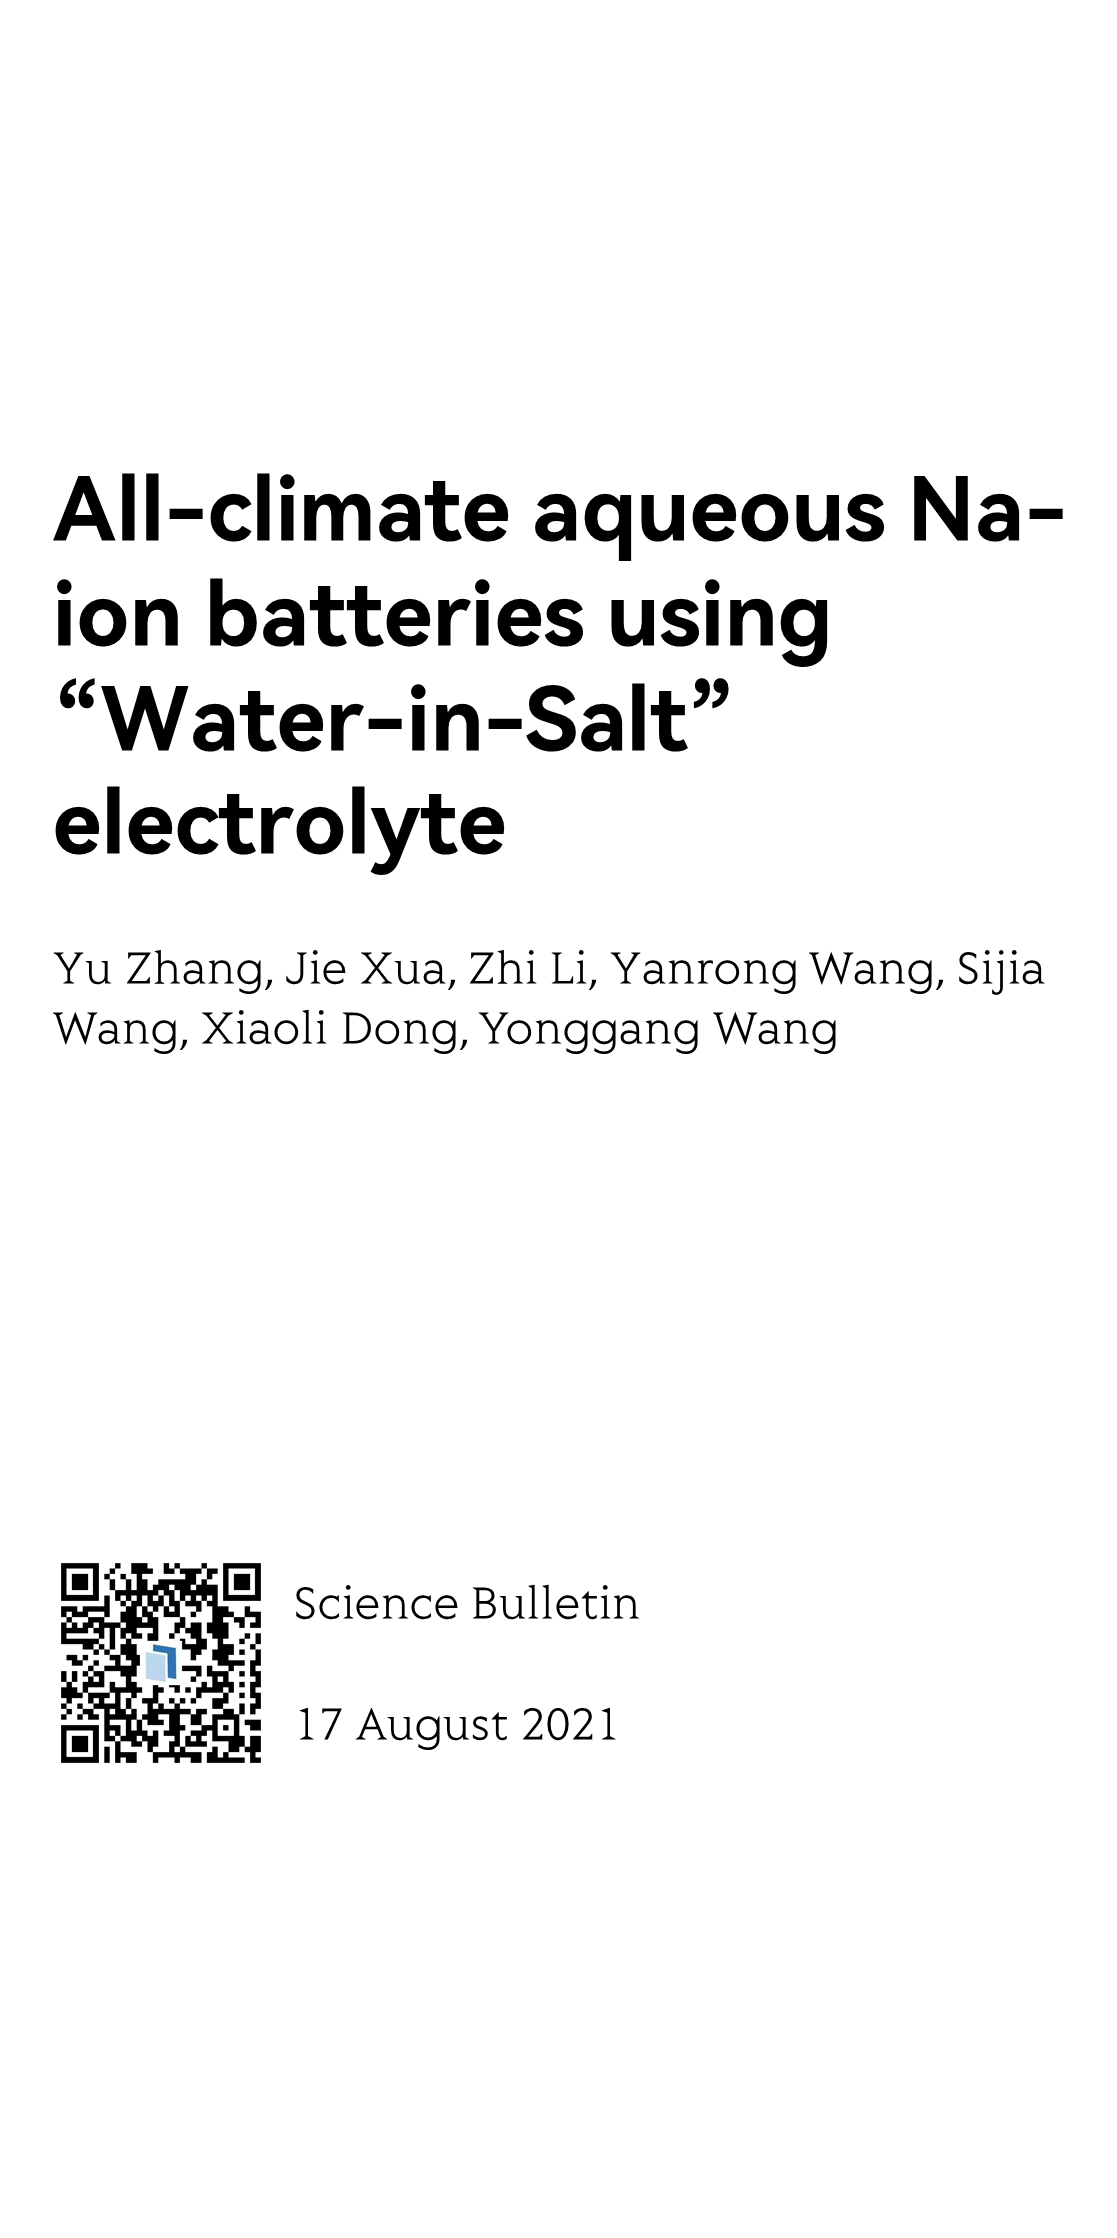 All-climate aqueous Na-ion batteries using “Water-in-Salt” electrolyte_1